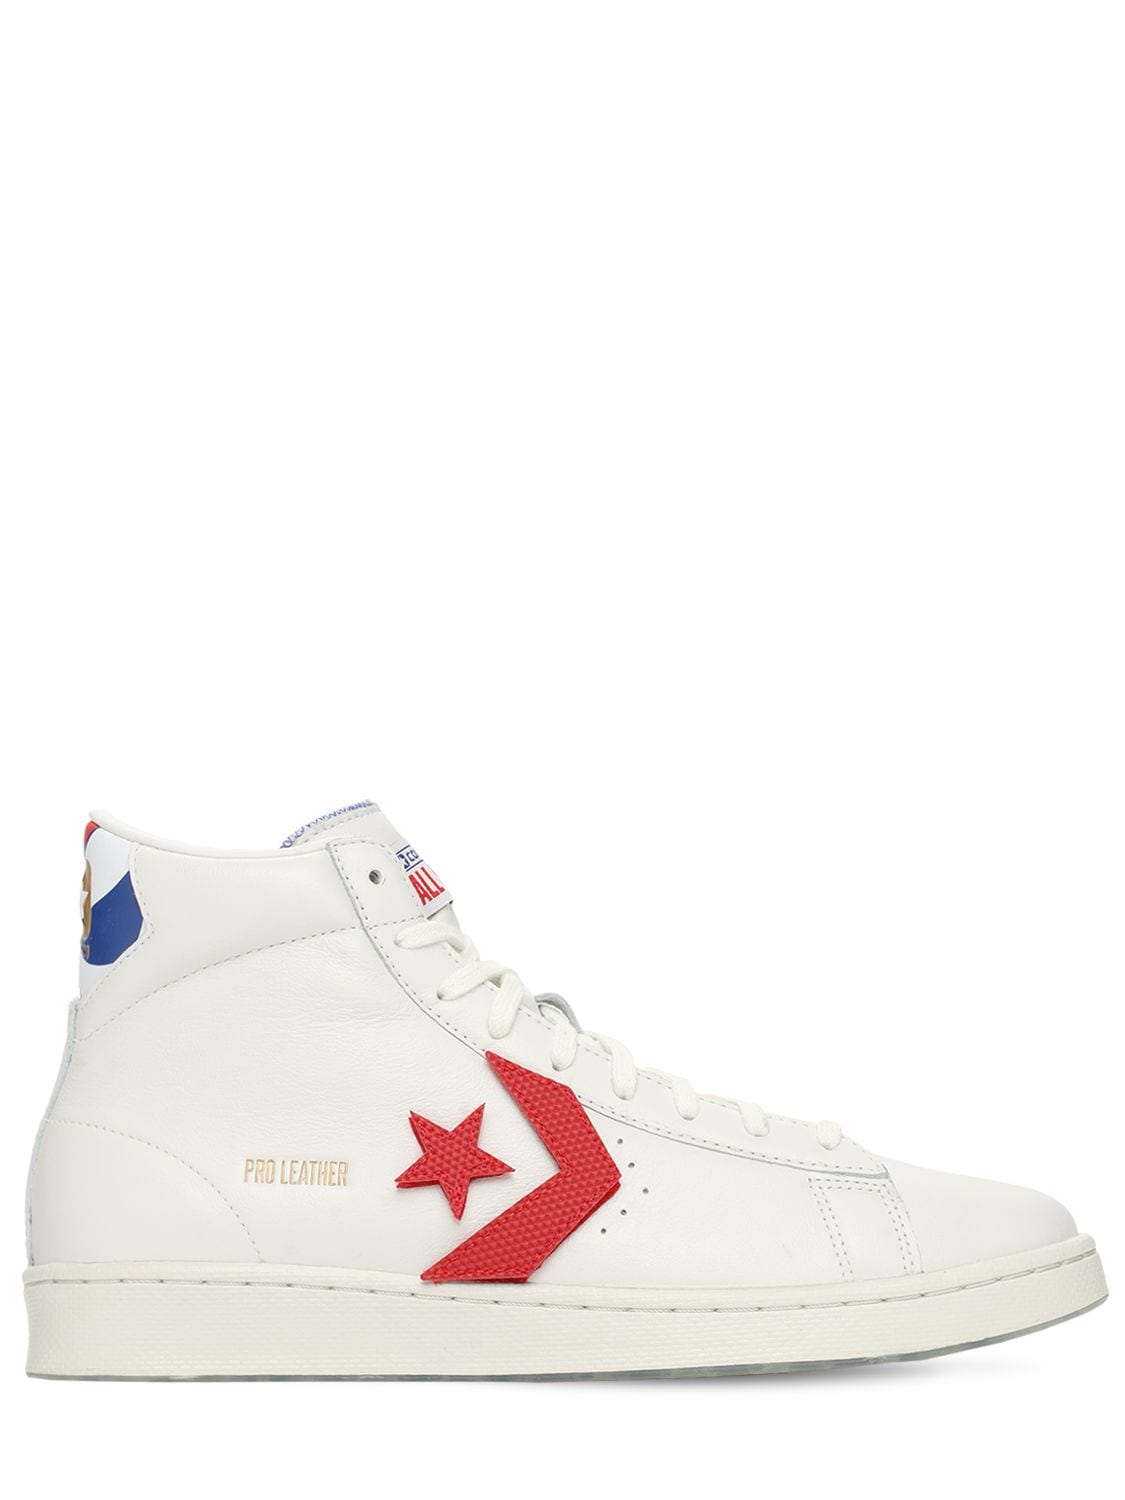 CONVERSE PRO LEATHER BIRTH OF FLIGHT SNEAKERS,73IWY5015-VKLOVEFHRSBXSELURQ2